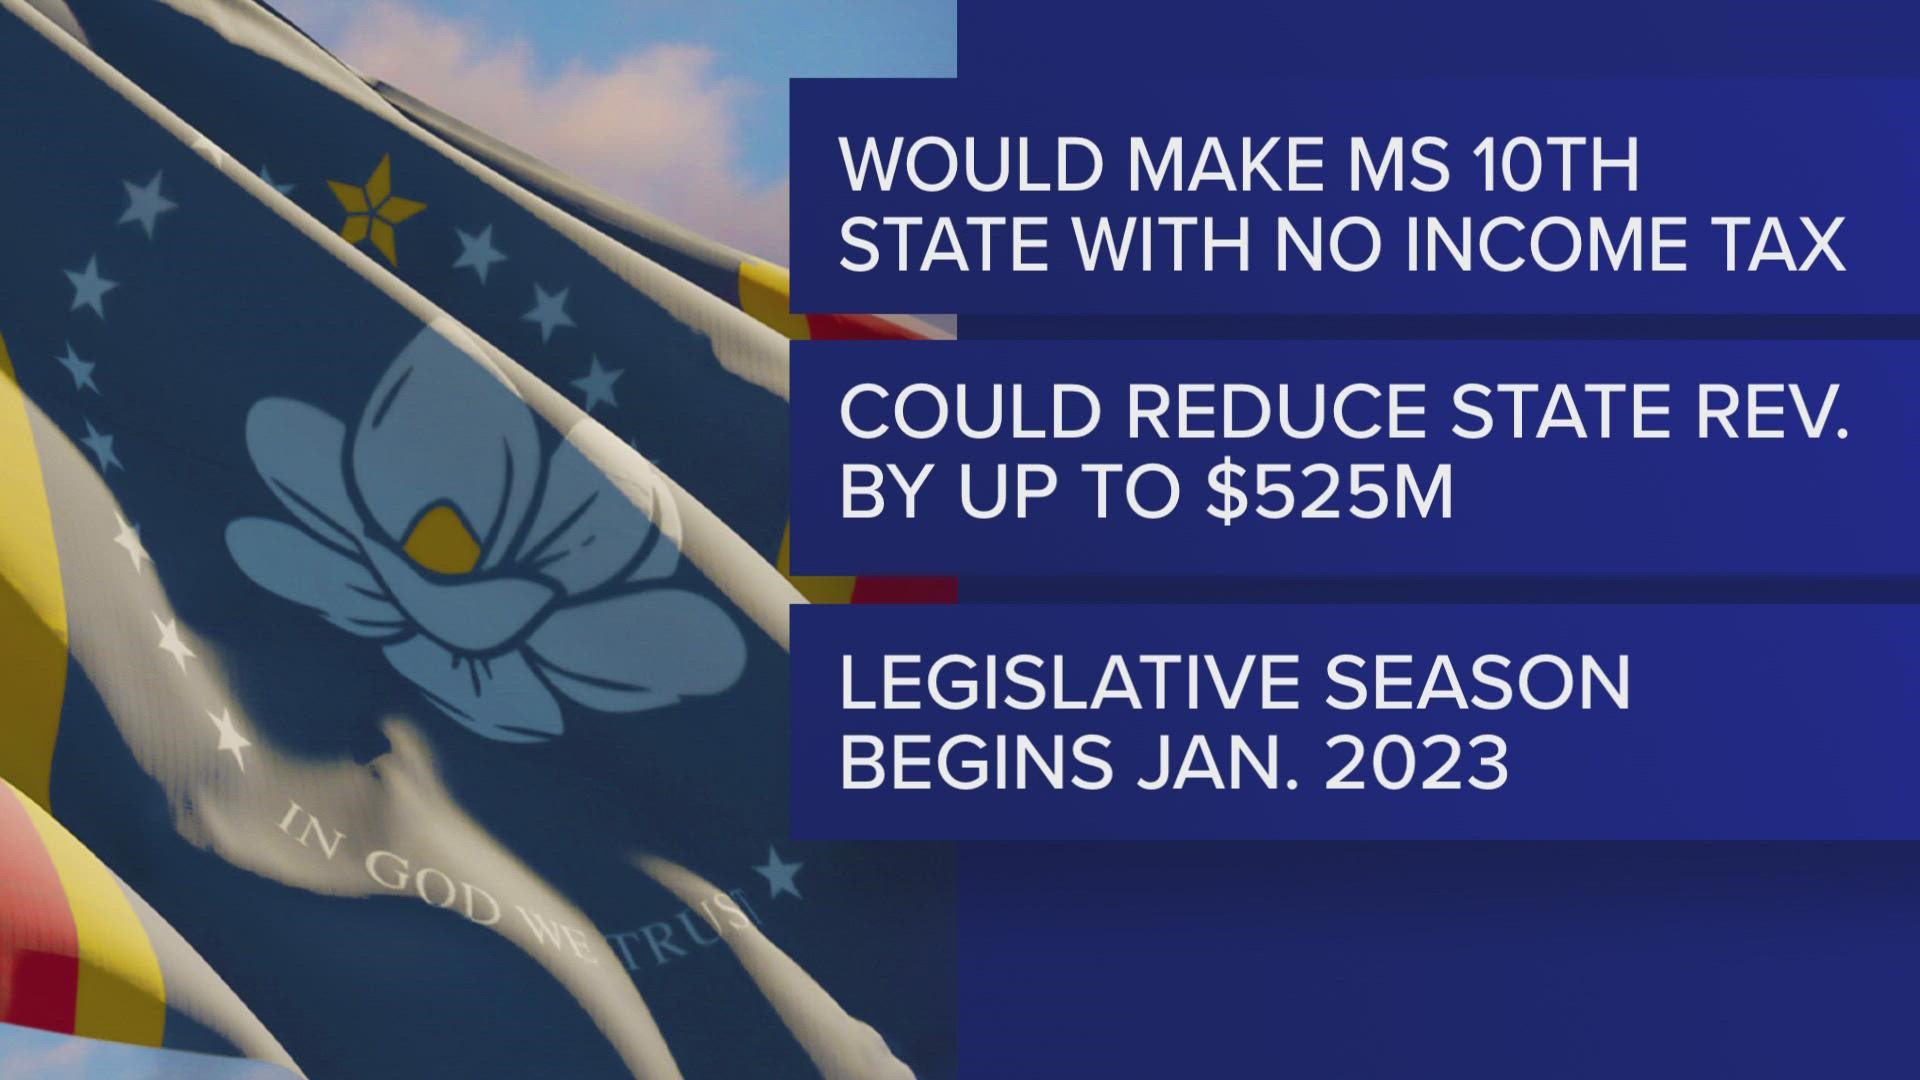 The move would make Mississippi the 10th state with no income tax.